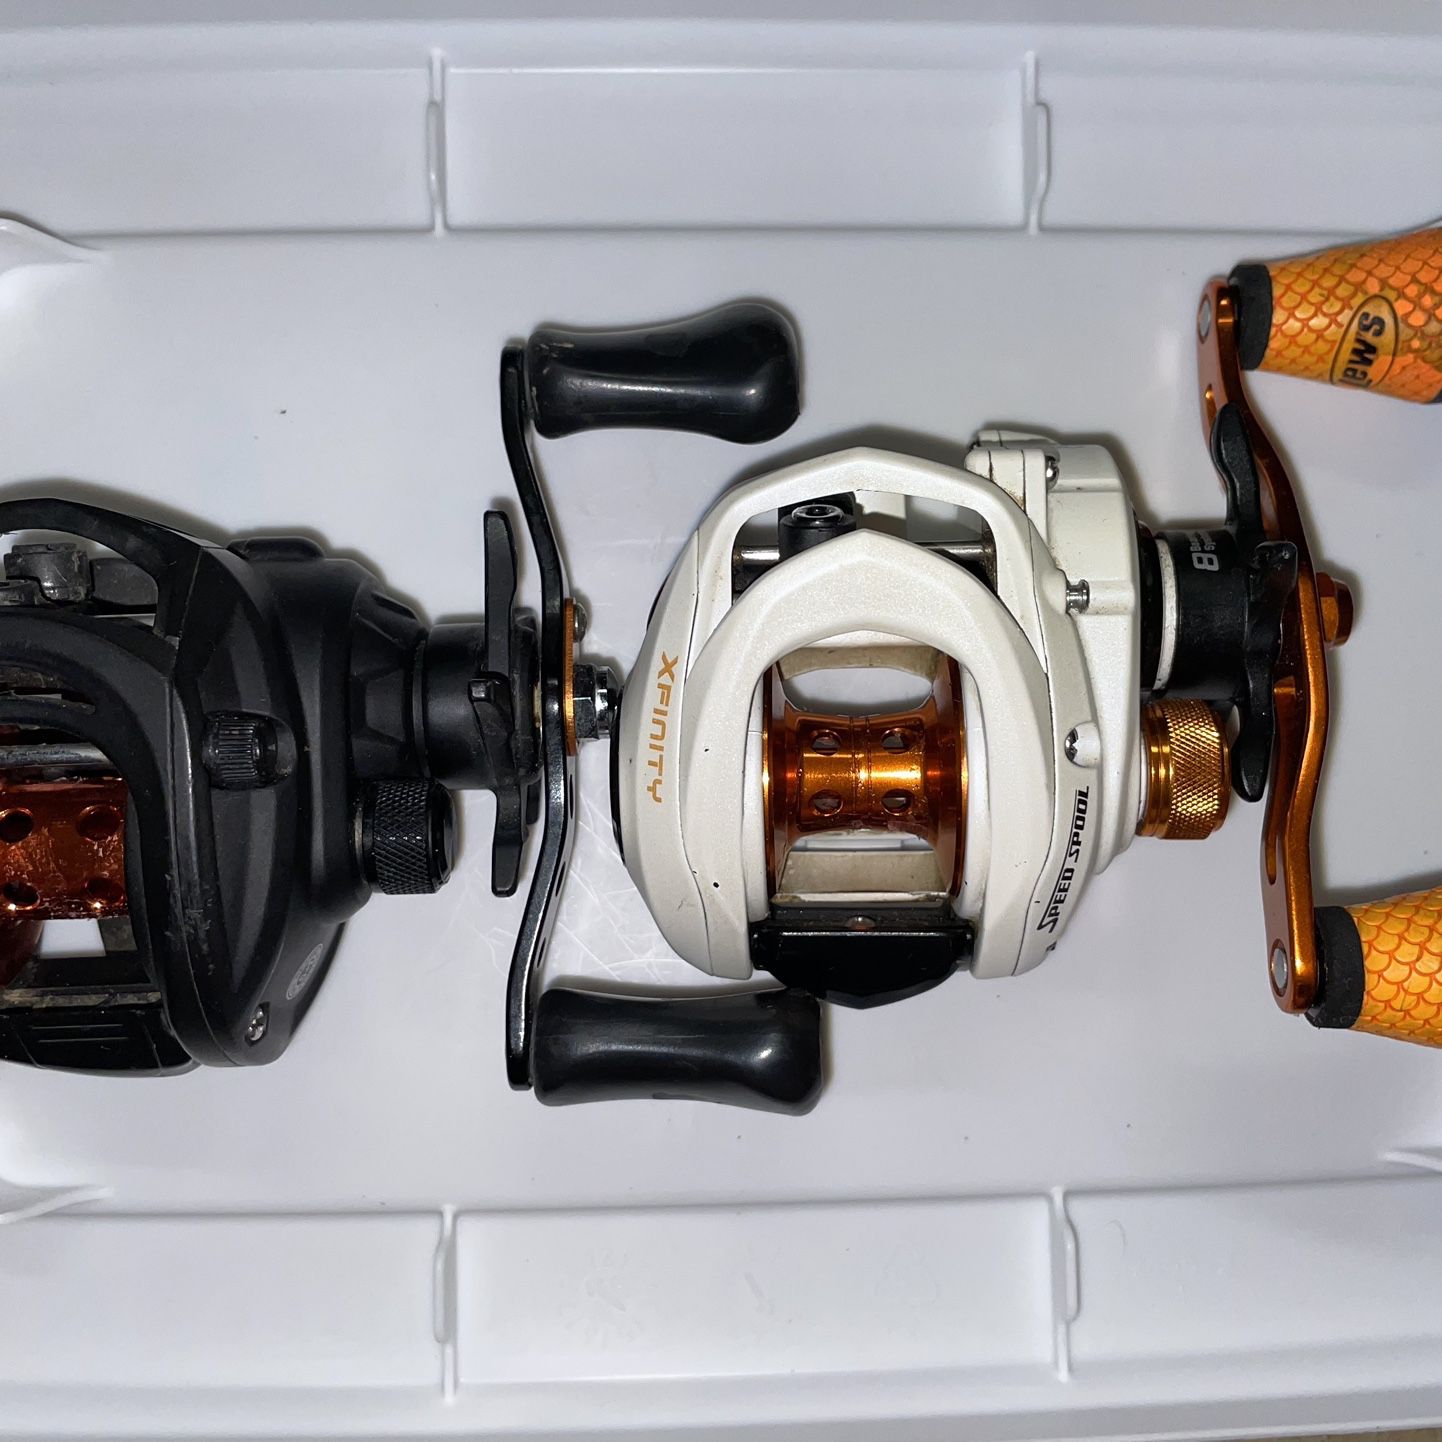 Ozark Trail And Lews RH Baitcaster Fishing Reels for Sale in